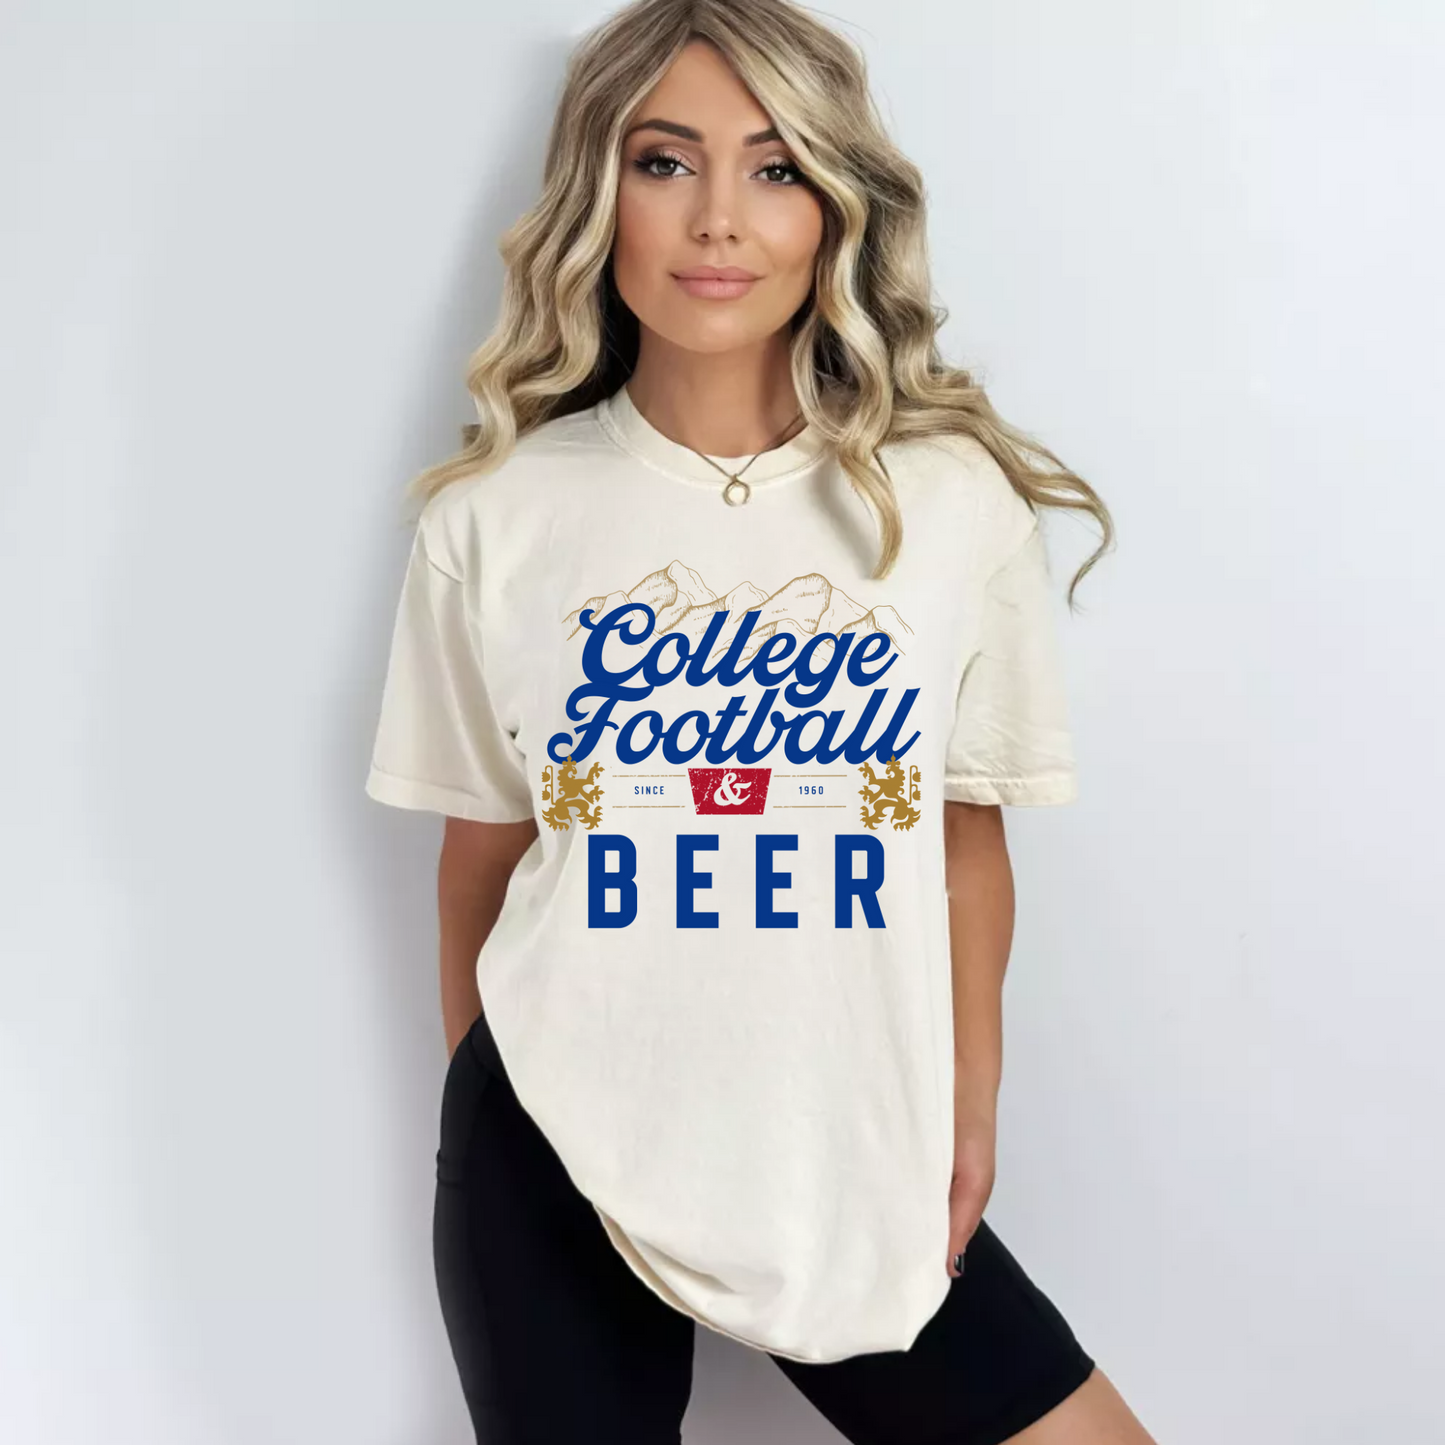 (shirt not included) College Football & Beer - Clear Film Transfer